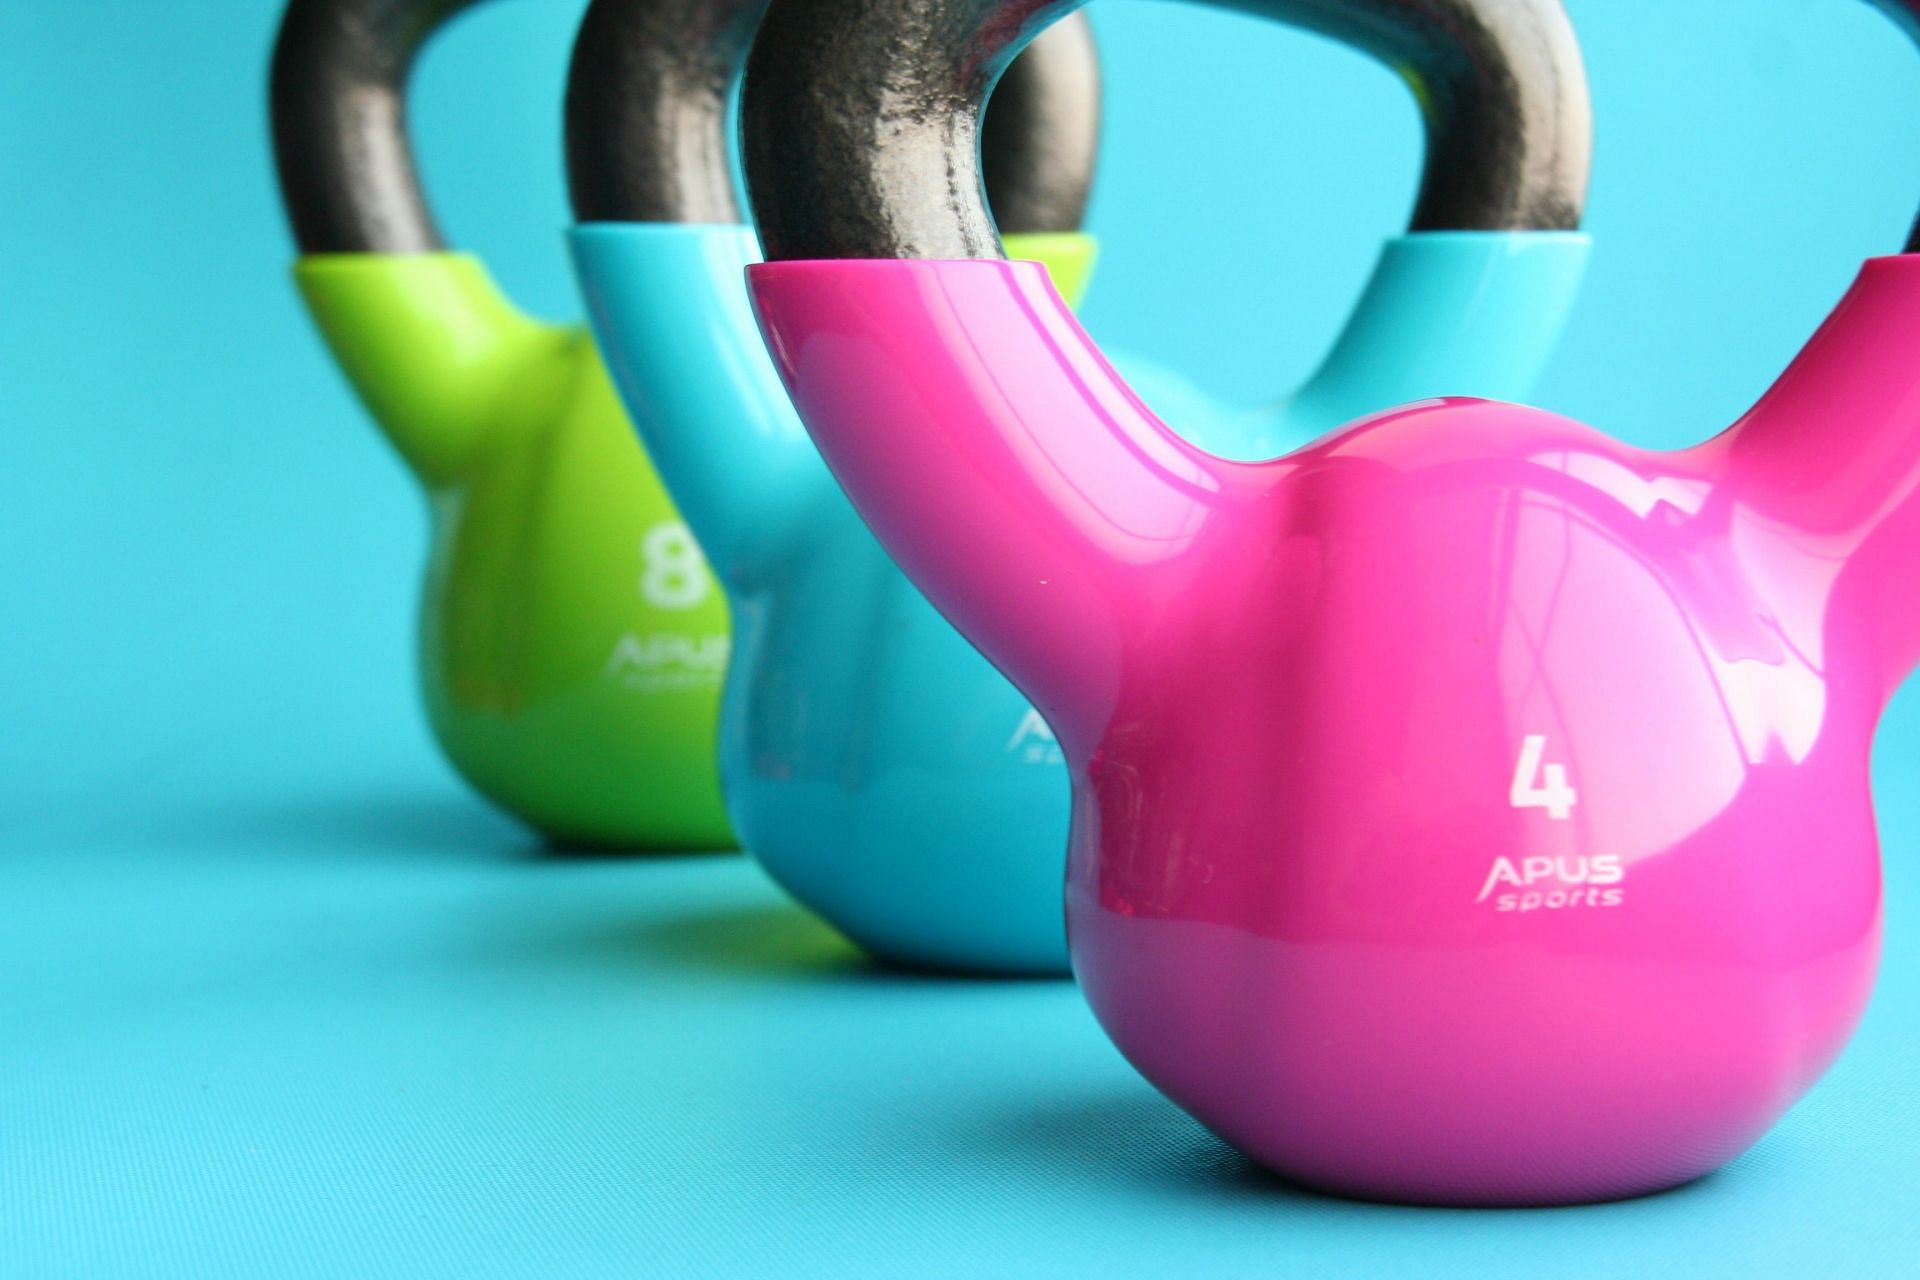 Using kettlebell to finish your workouts (image sourced via Pexels / Photo by pixabays)